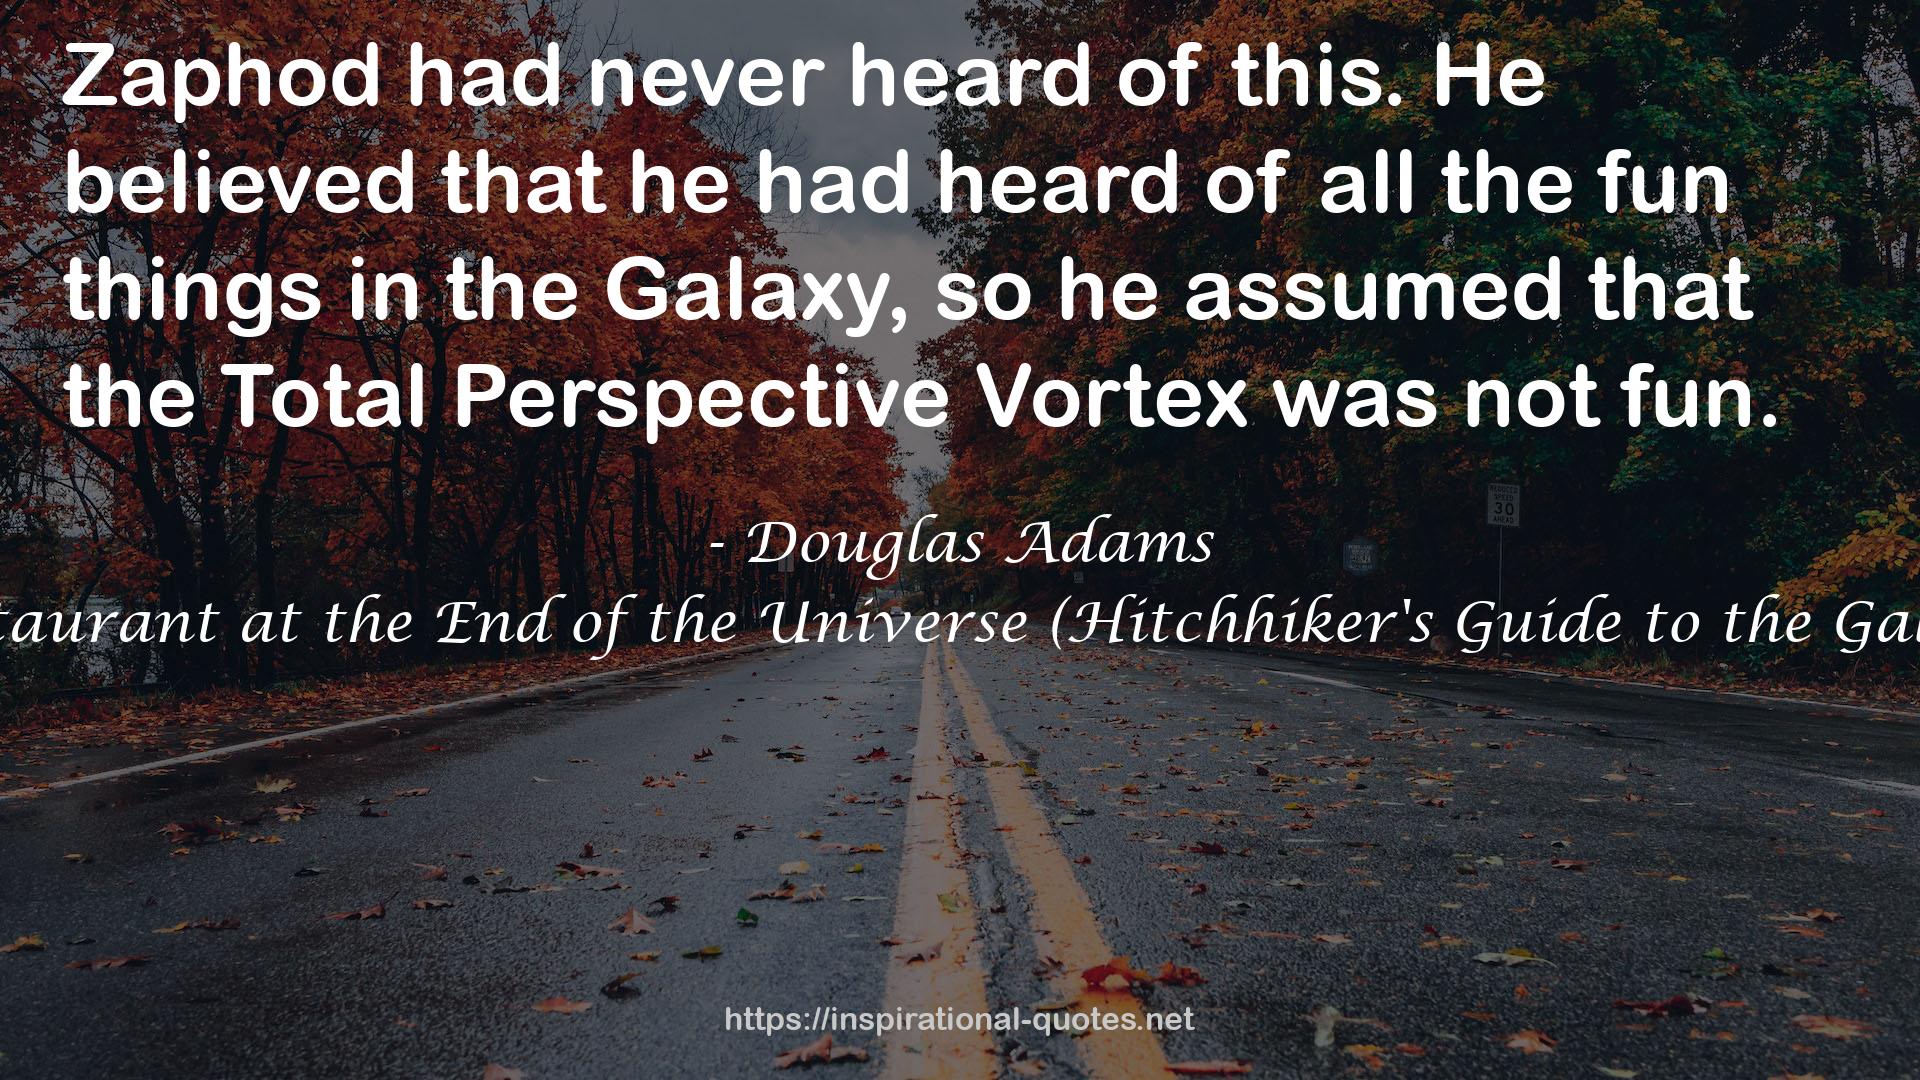 the Total Perspective Vortex  QUOTES